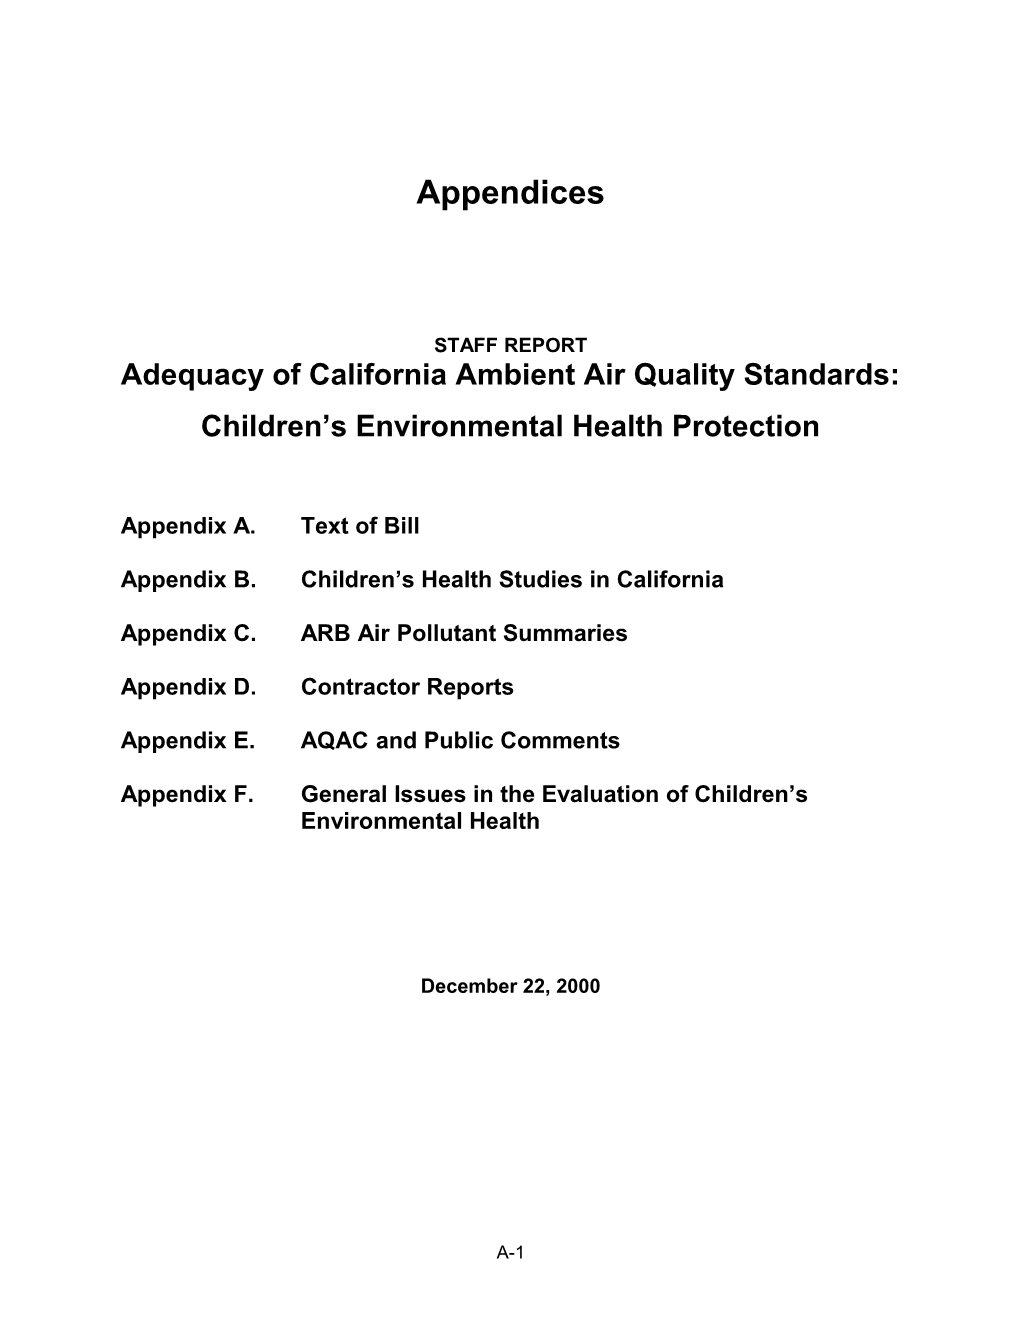 Adequacy of California Ambient Air Quality Standards: Children S Environmental Health